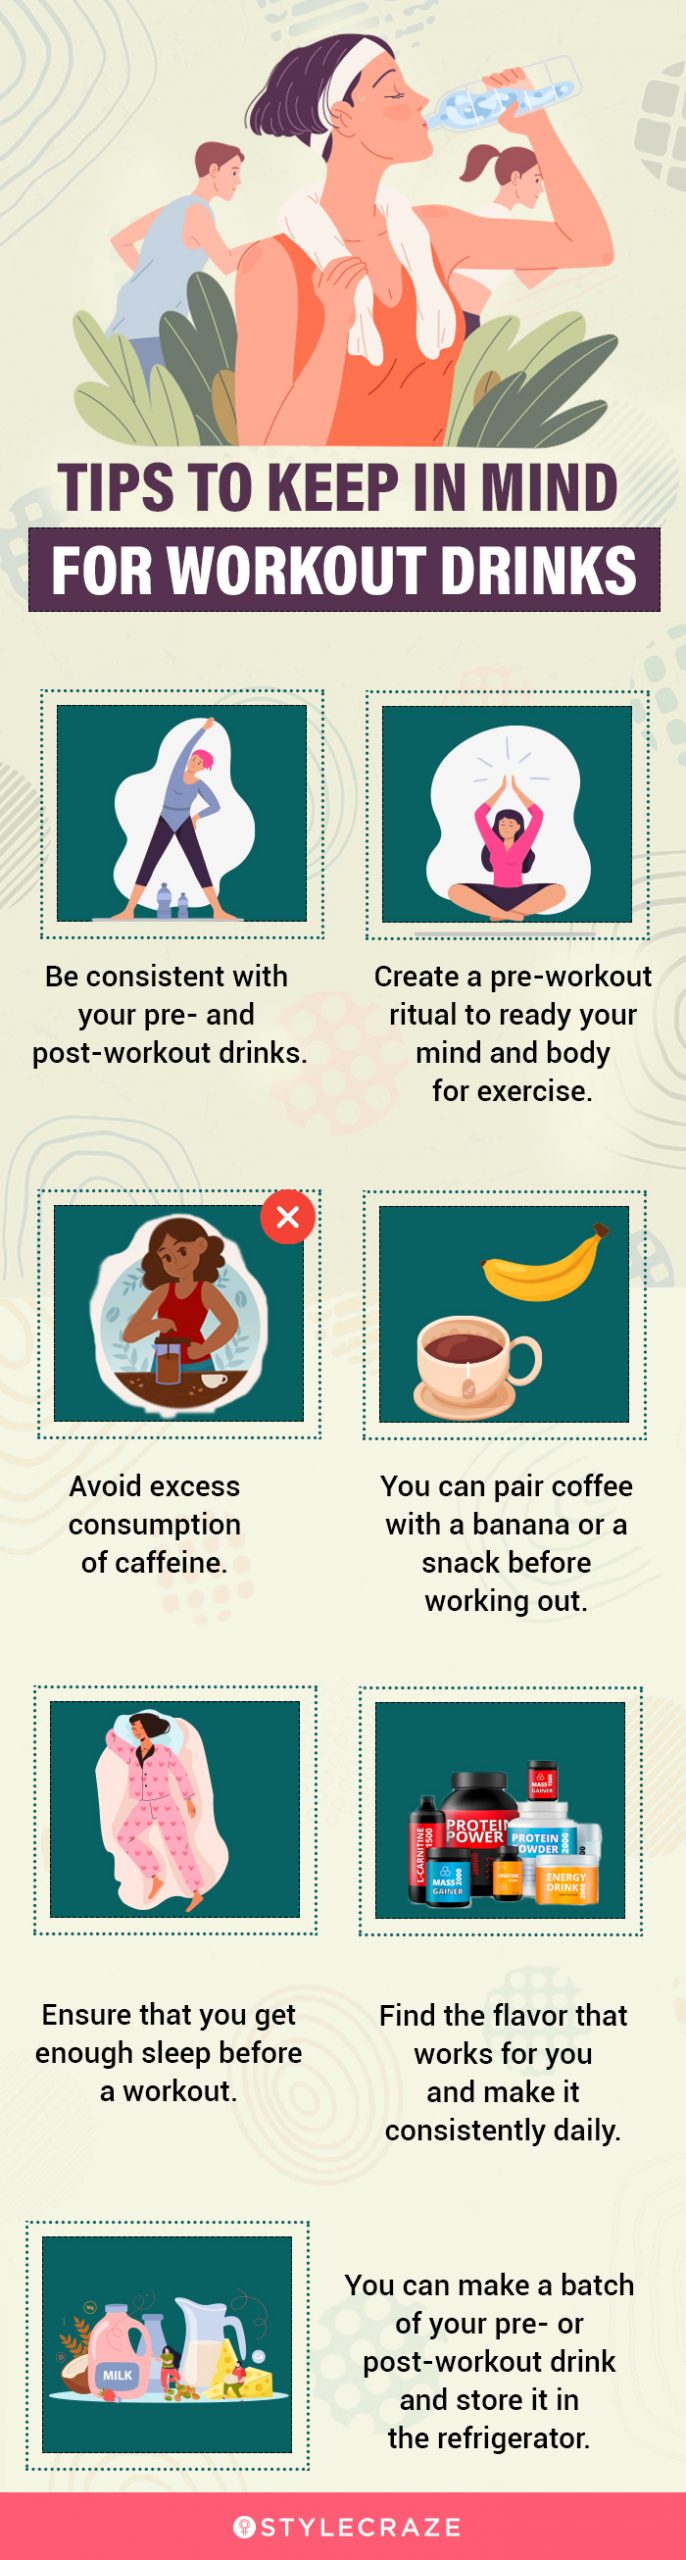 tips to keep in mind for workout drinks [infographic]